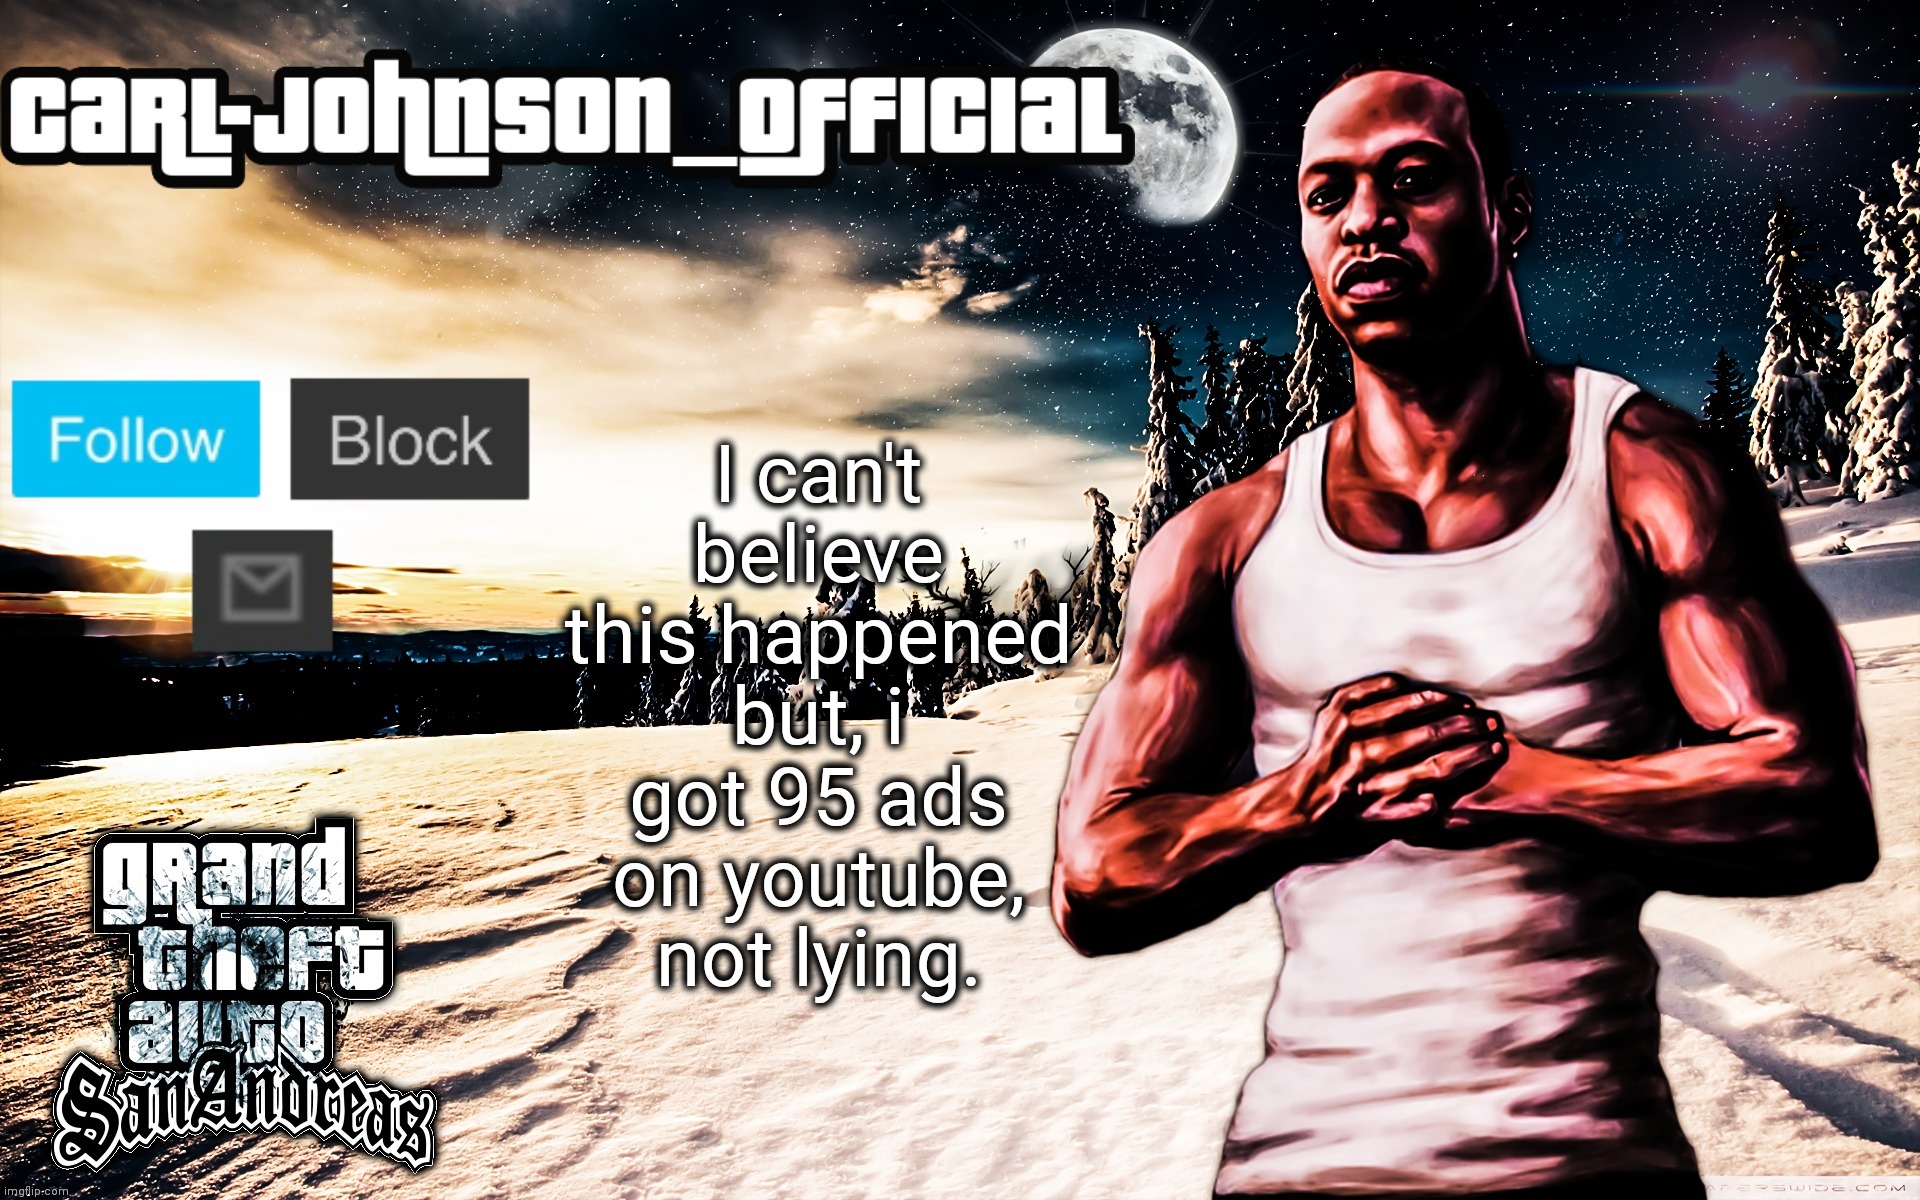 ._. | I can't believe this happened but, i got 95 ads on youtube, not lying. | image tagged in carl-johnson_official template | made w/ Imgflip meme maker